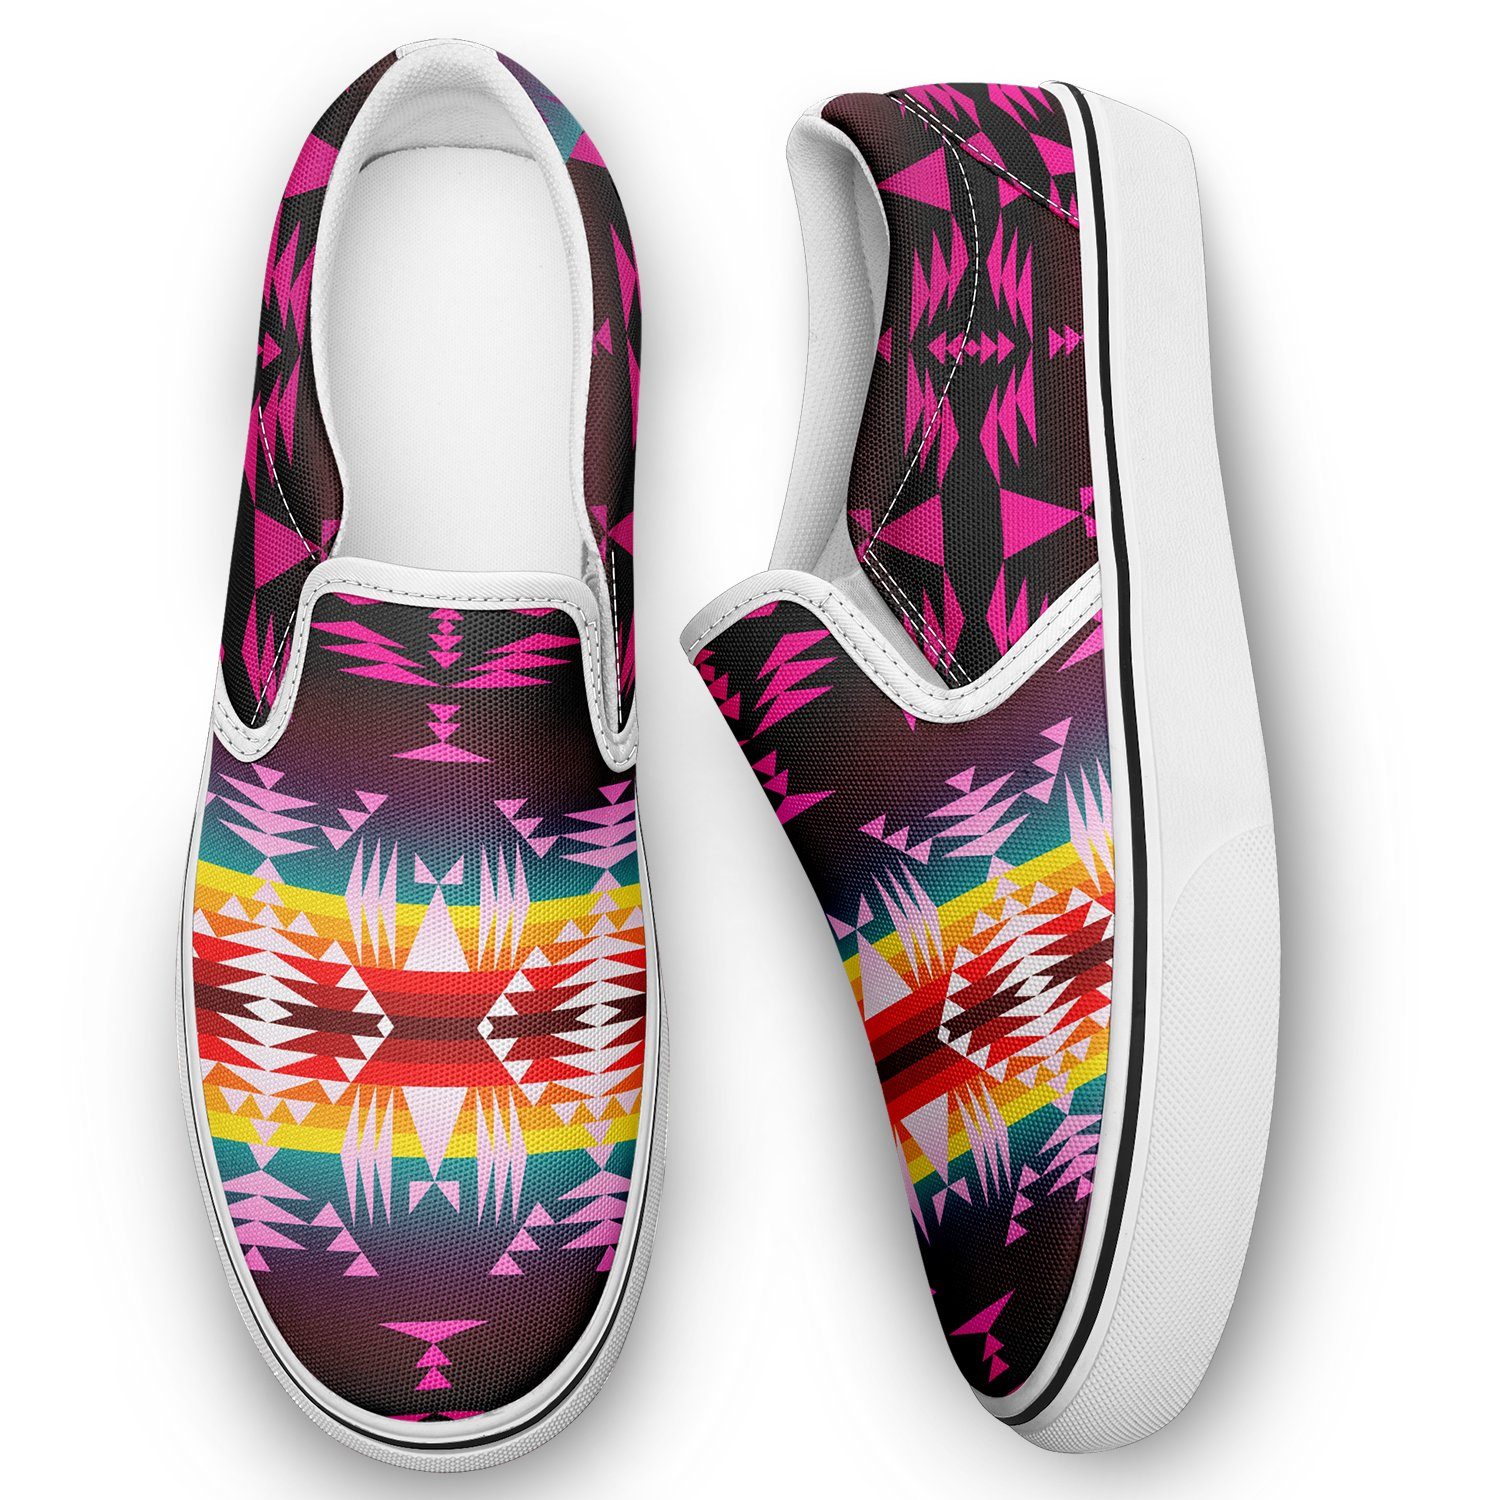 Between the Appalachian Mountains Otoyimm Canvas Slip On Shoes otoyimm Herman 